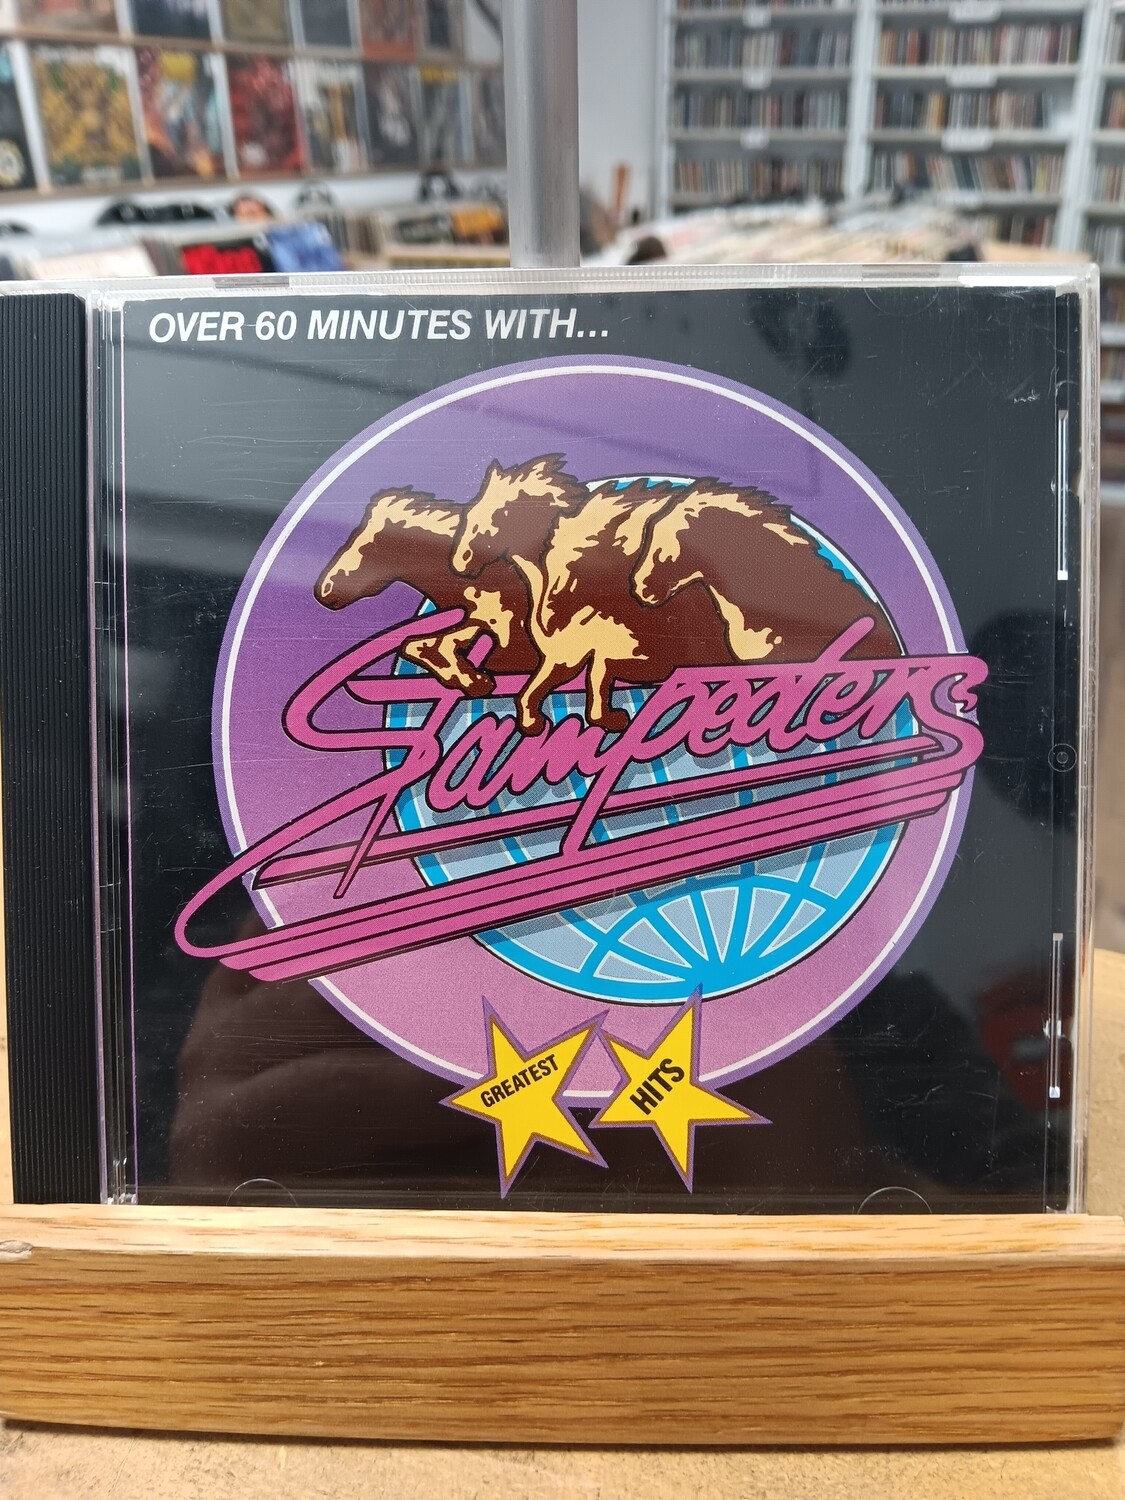 THE STAMPEDERS - Over 60 minutes with The Stampeders (CD)